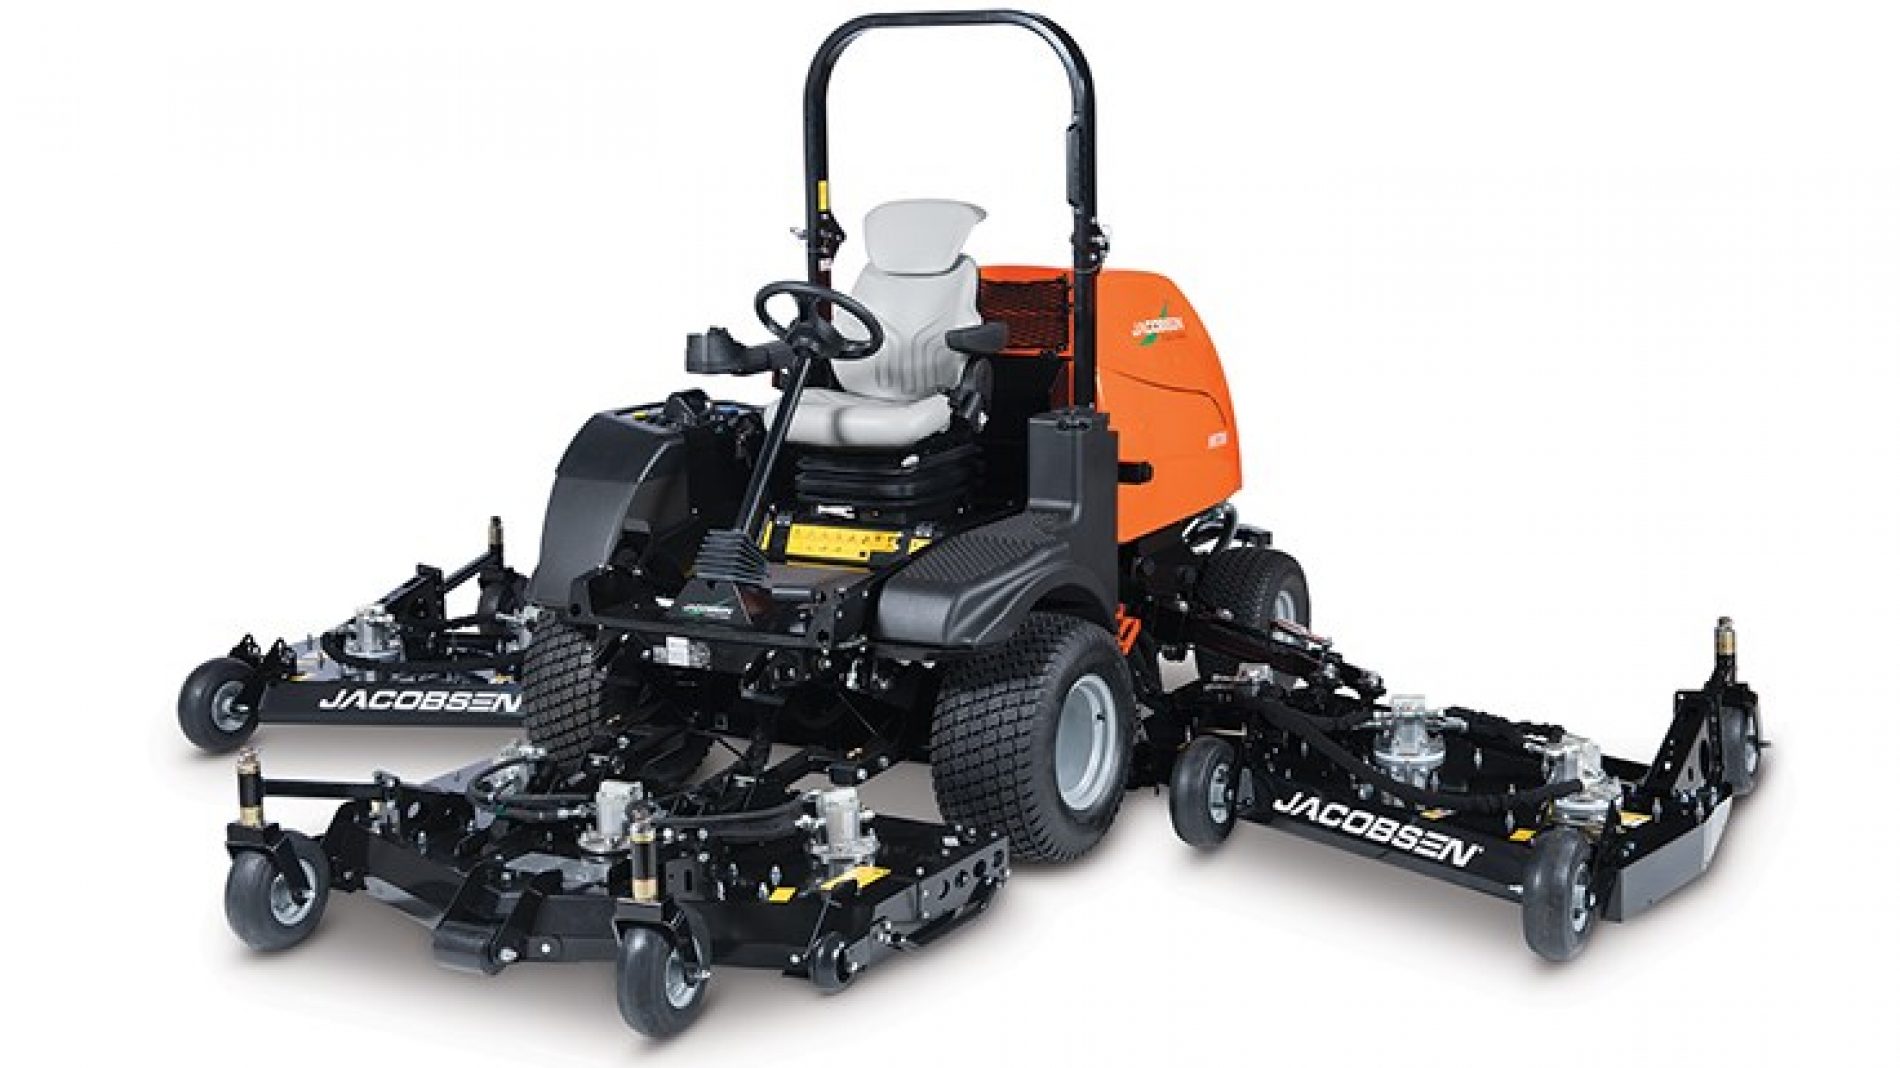 Jacobsen Introduces World’s First 14-foot Wide Rotary Mower